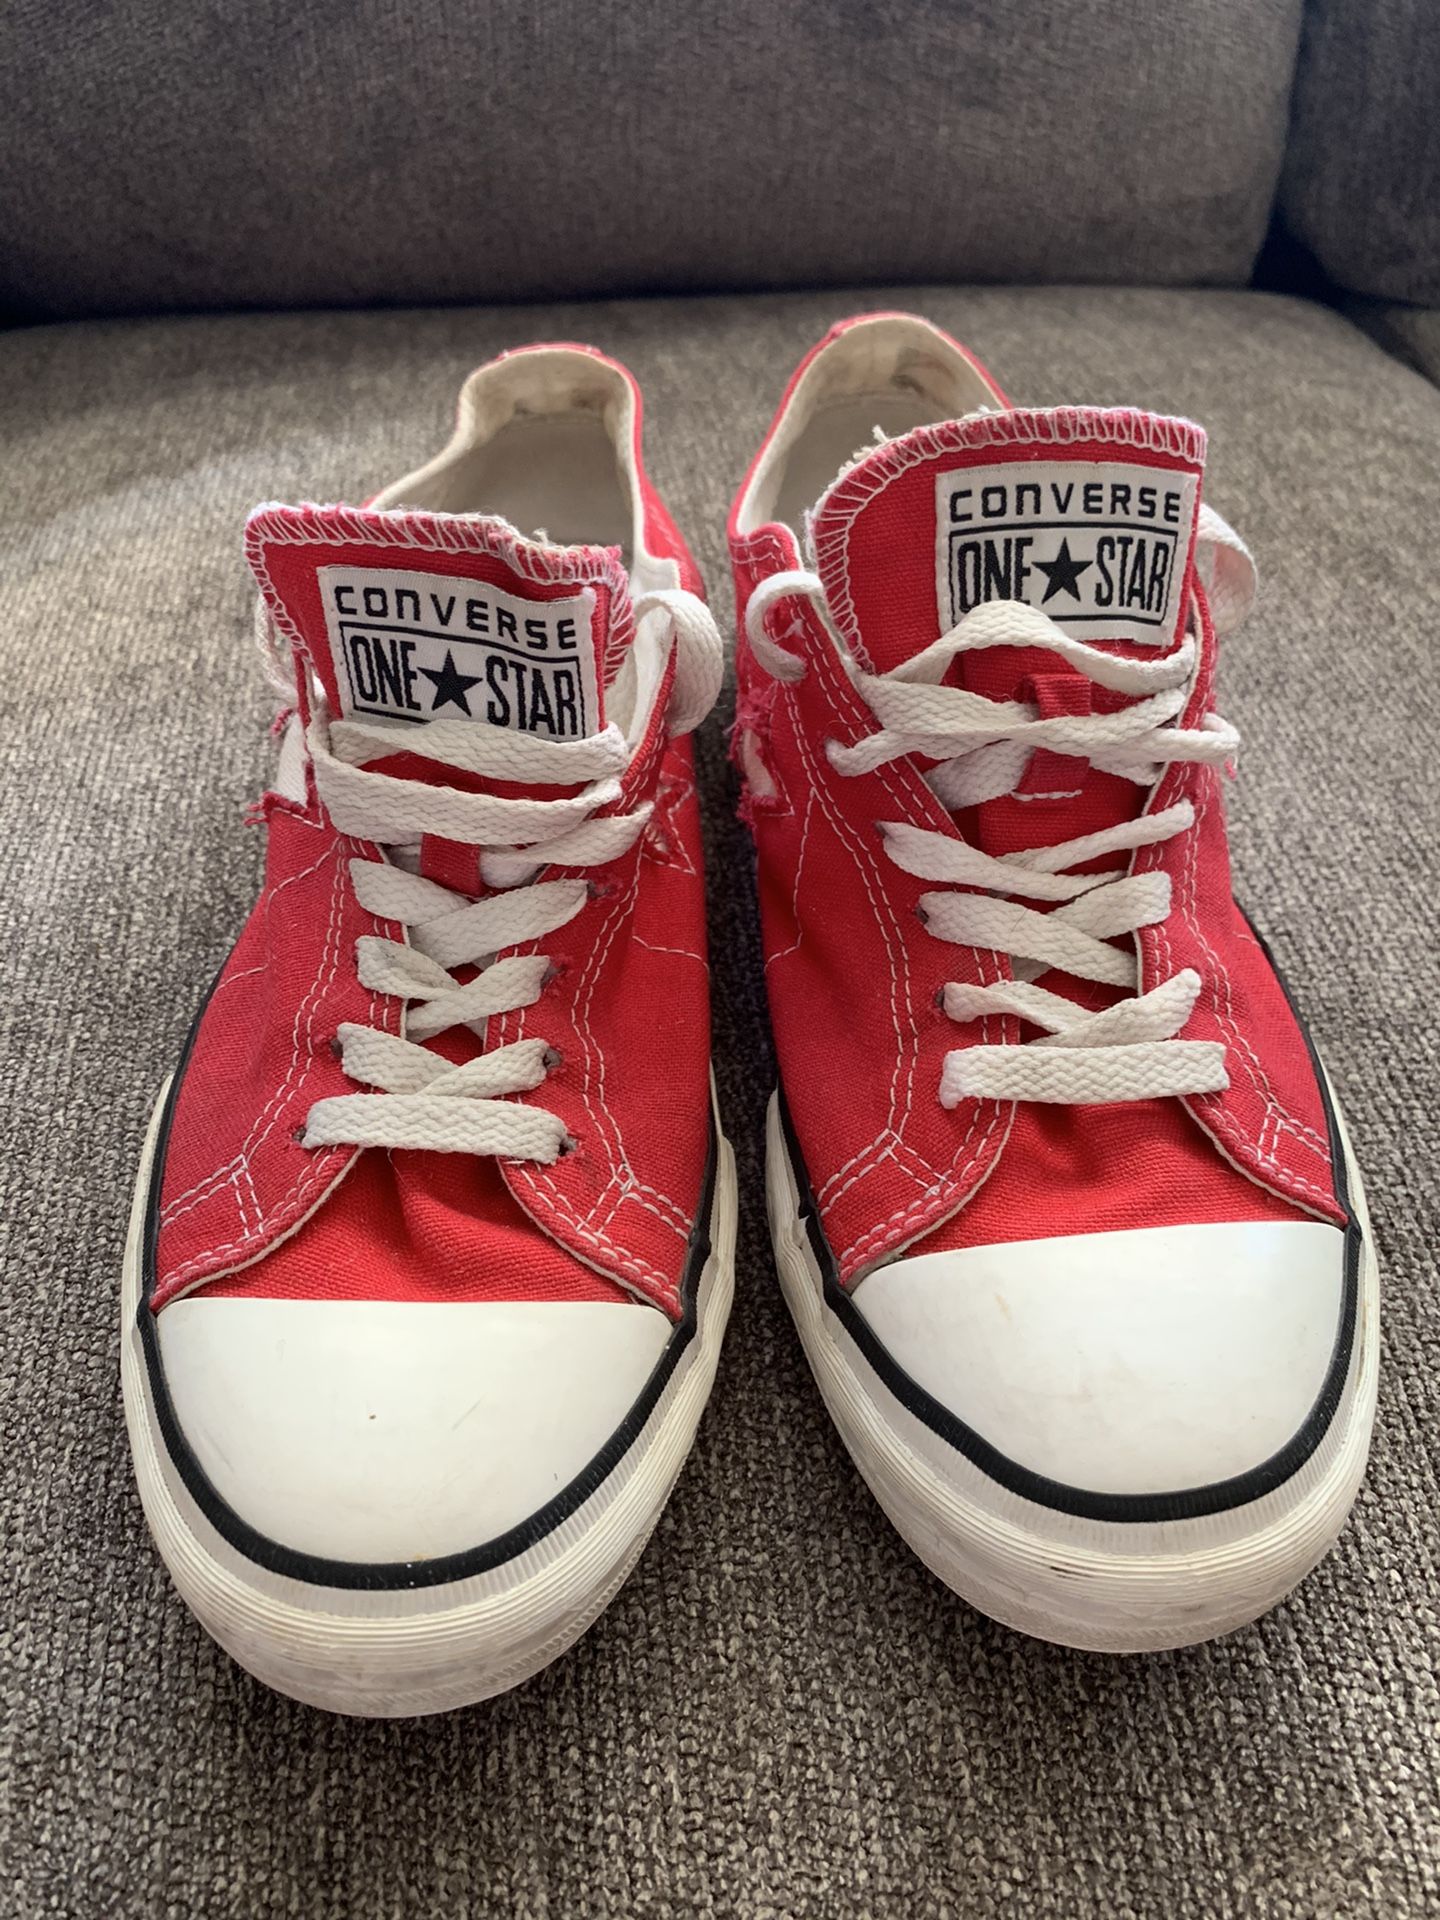 Pre owned women’s converse 9.5